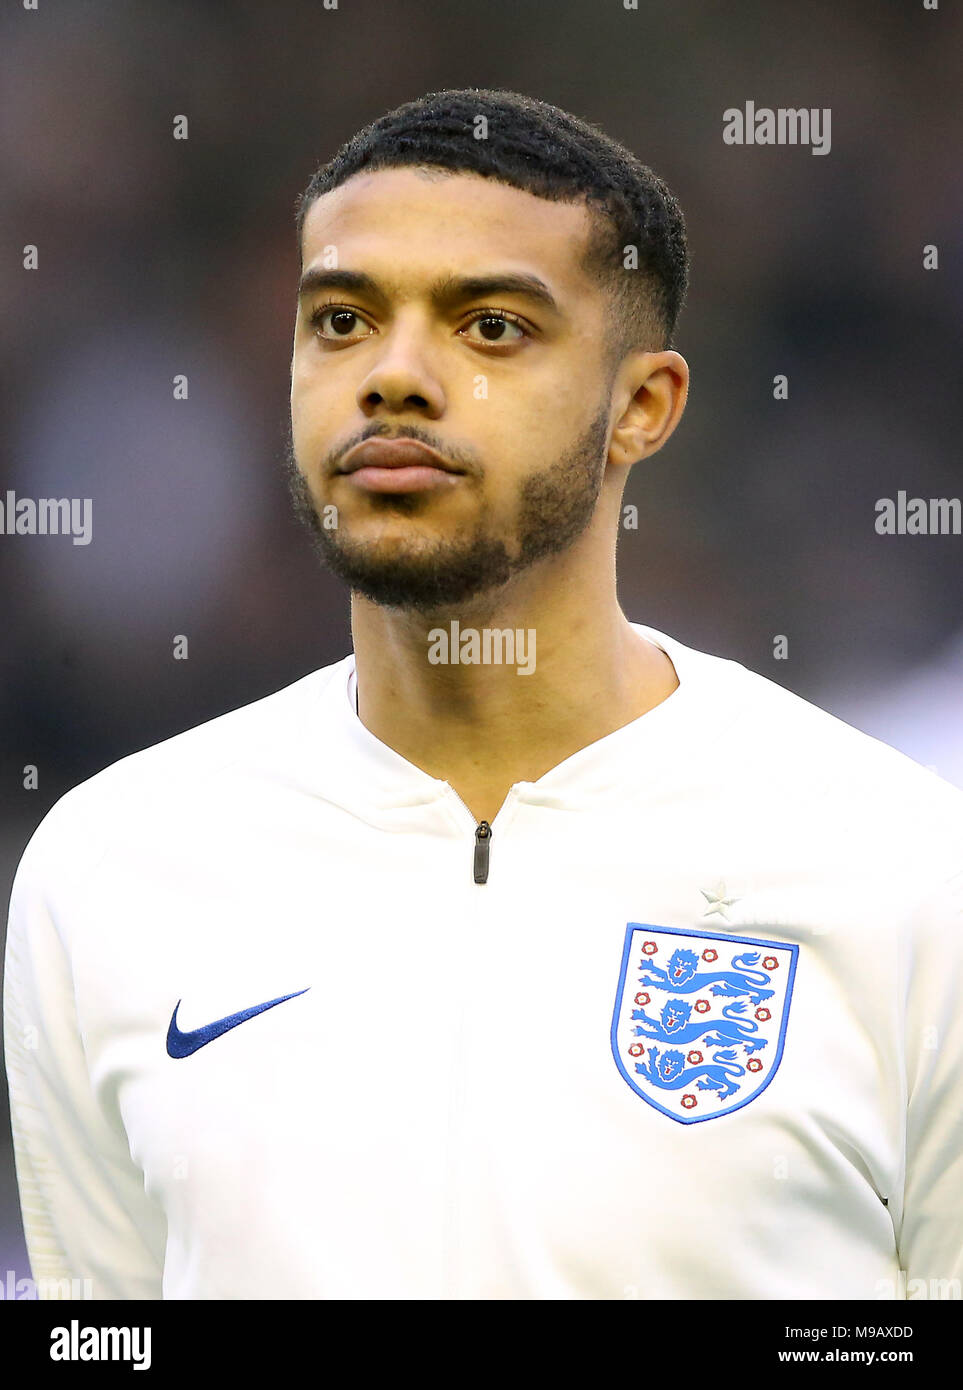 England U21's Jake Clarke-Salter during the U21 international friendly match at Molineux, Wolverhampton. PRESS ASSOCIATION Photo. Picture date: Saturday March 24, 2018. See PA story SOCCER England U21. Photo credit should read: Nigel French/PA Wire. RESTRICTIONS: Use subject to FA restrictions. Editorial use only. Commercial use only with prior written consent of the FA. No editing except cropping. Stock Photo